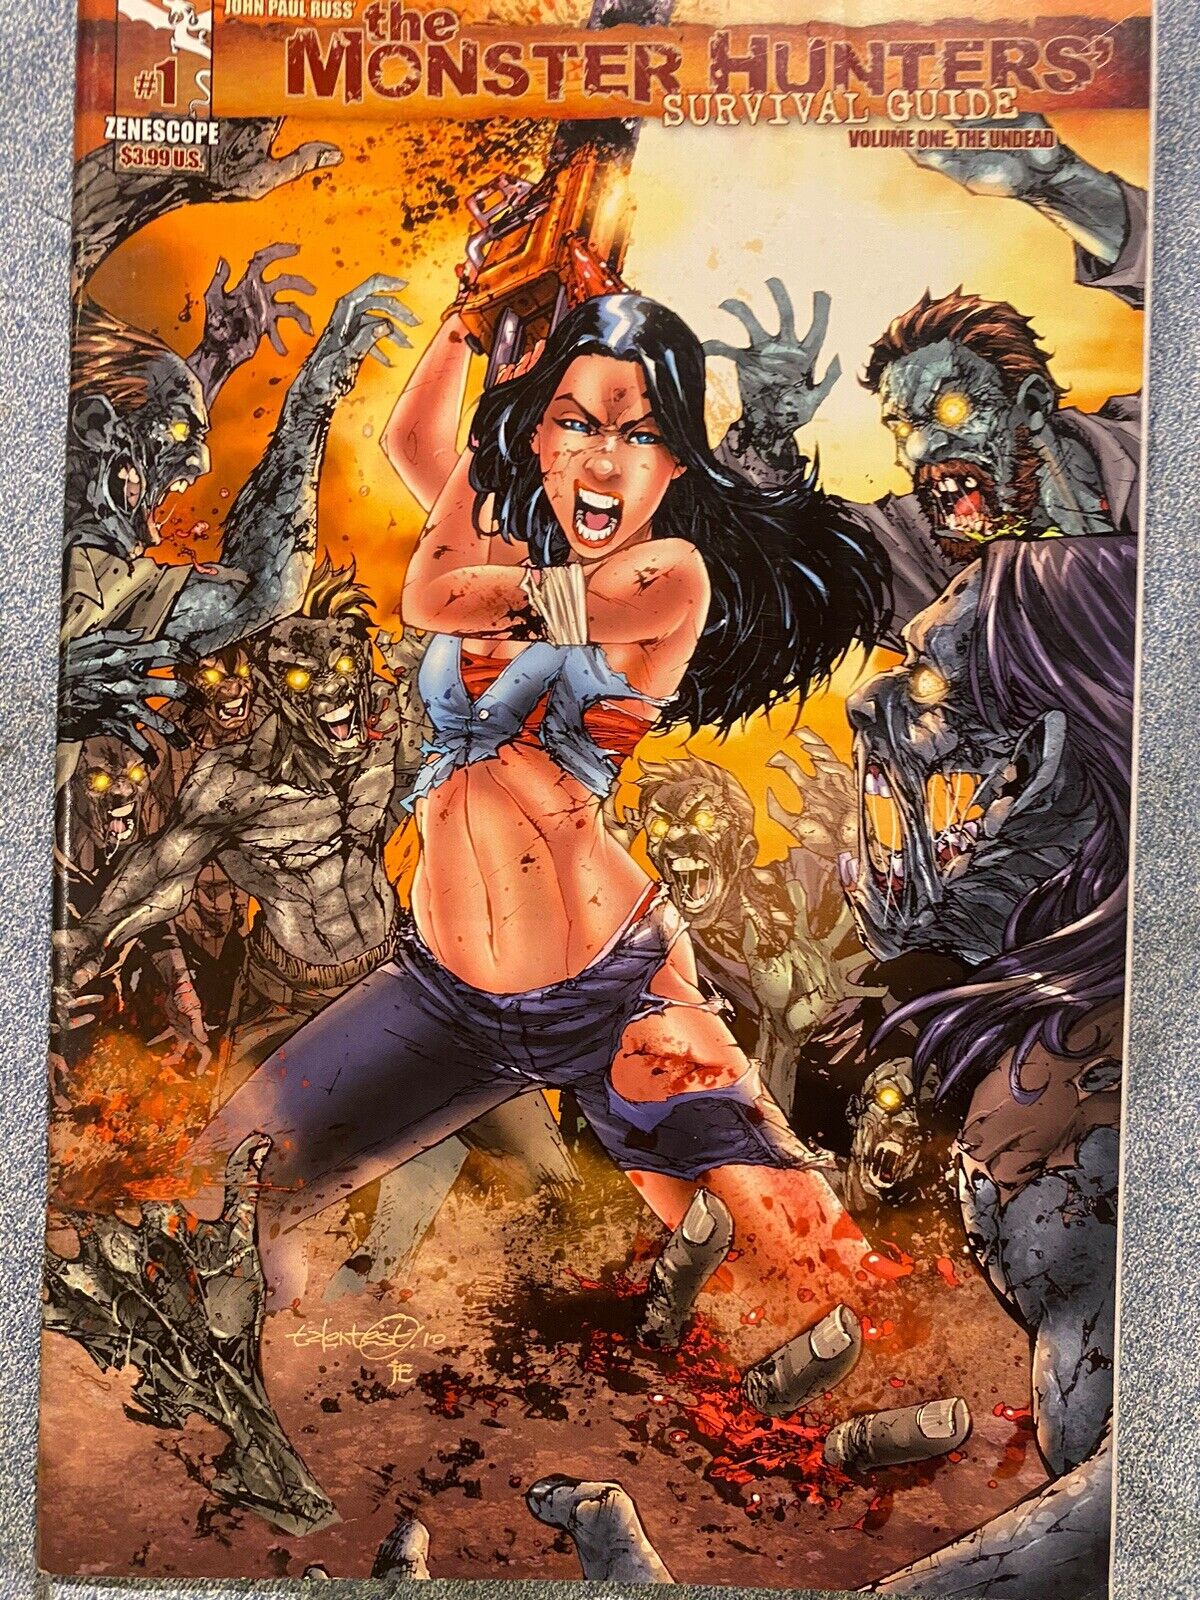 Monster Hunters Survival Guide #1 Zenescope, 2010) Volume One The Undead